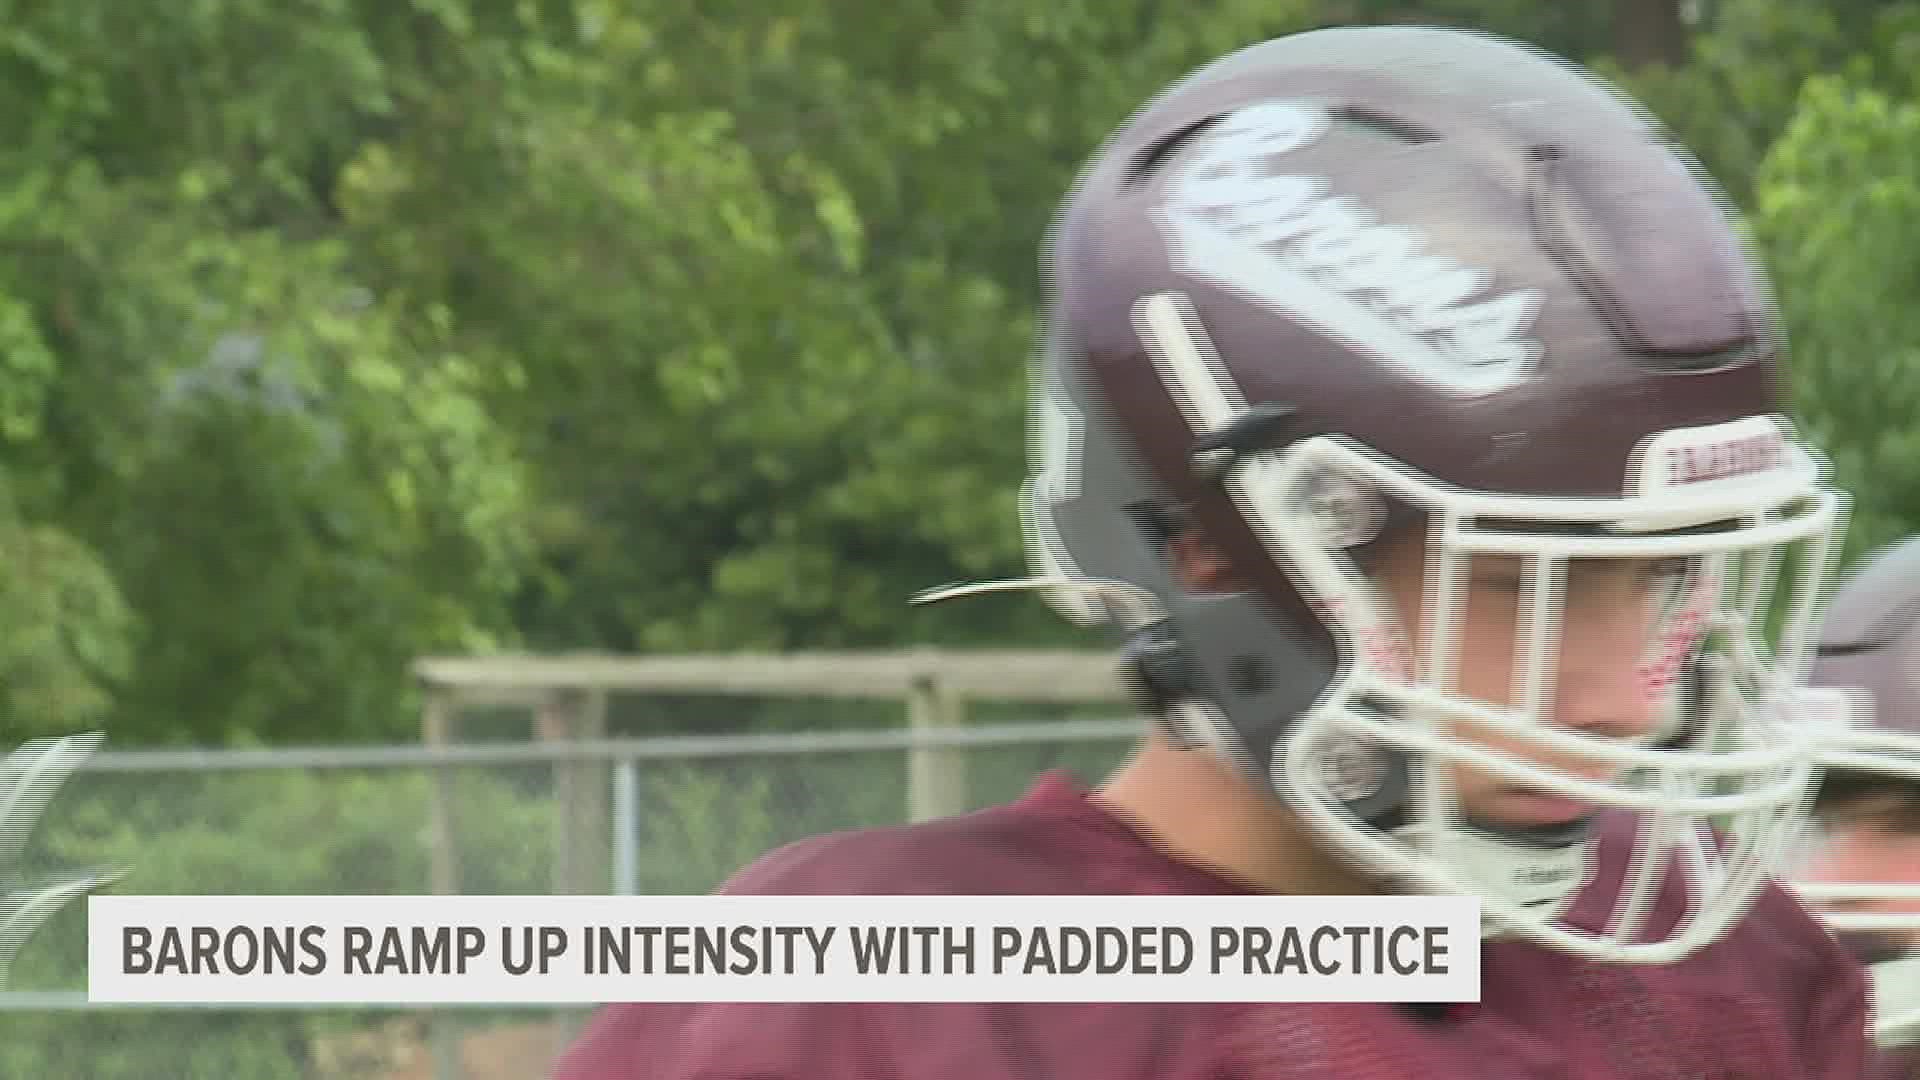 Manheim Central looks to be fast and intense in everything they do.